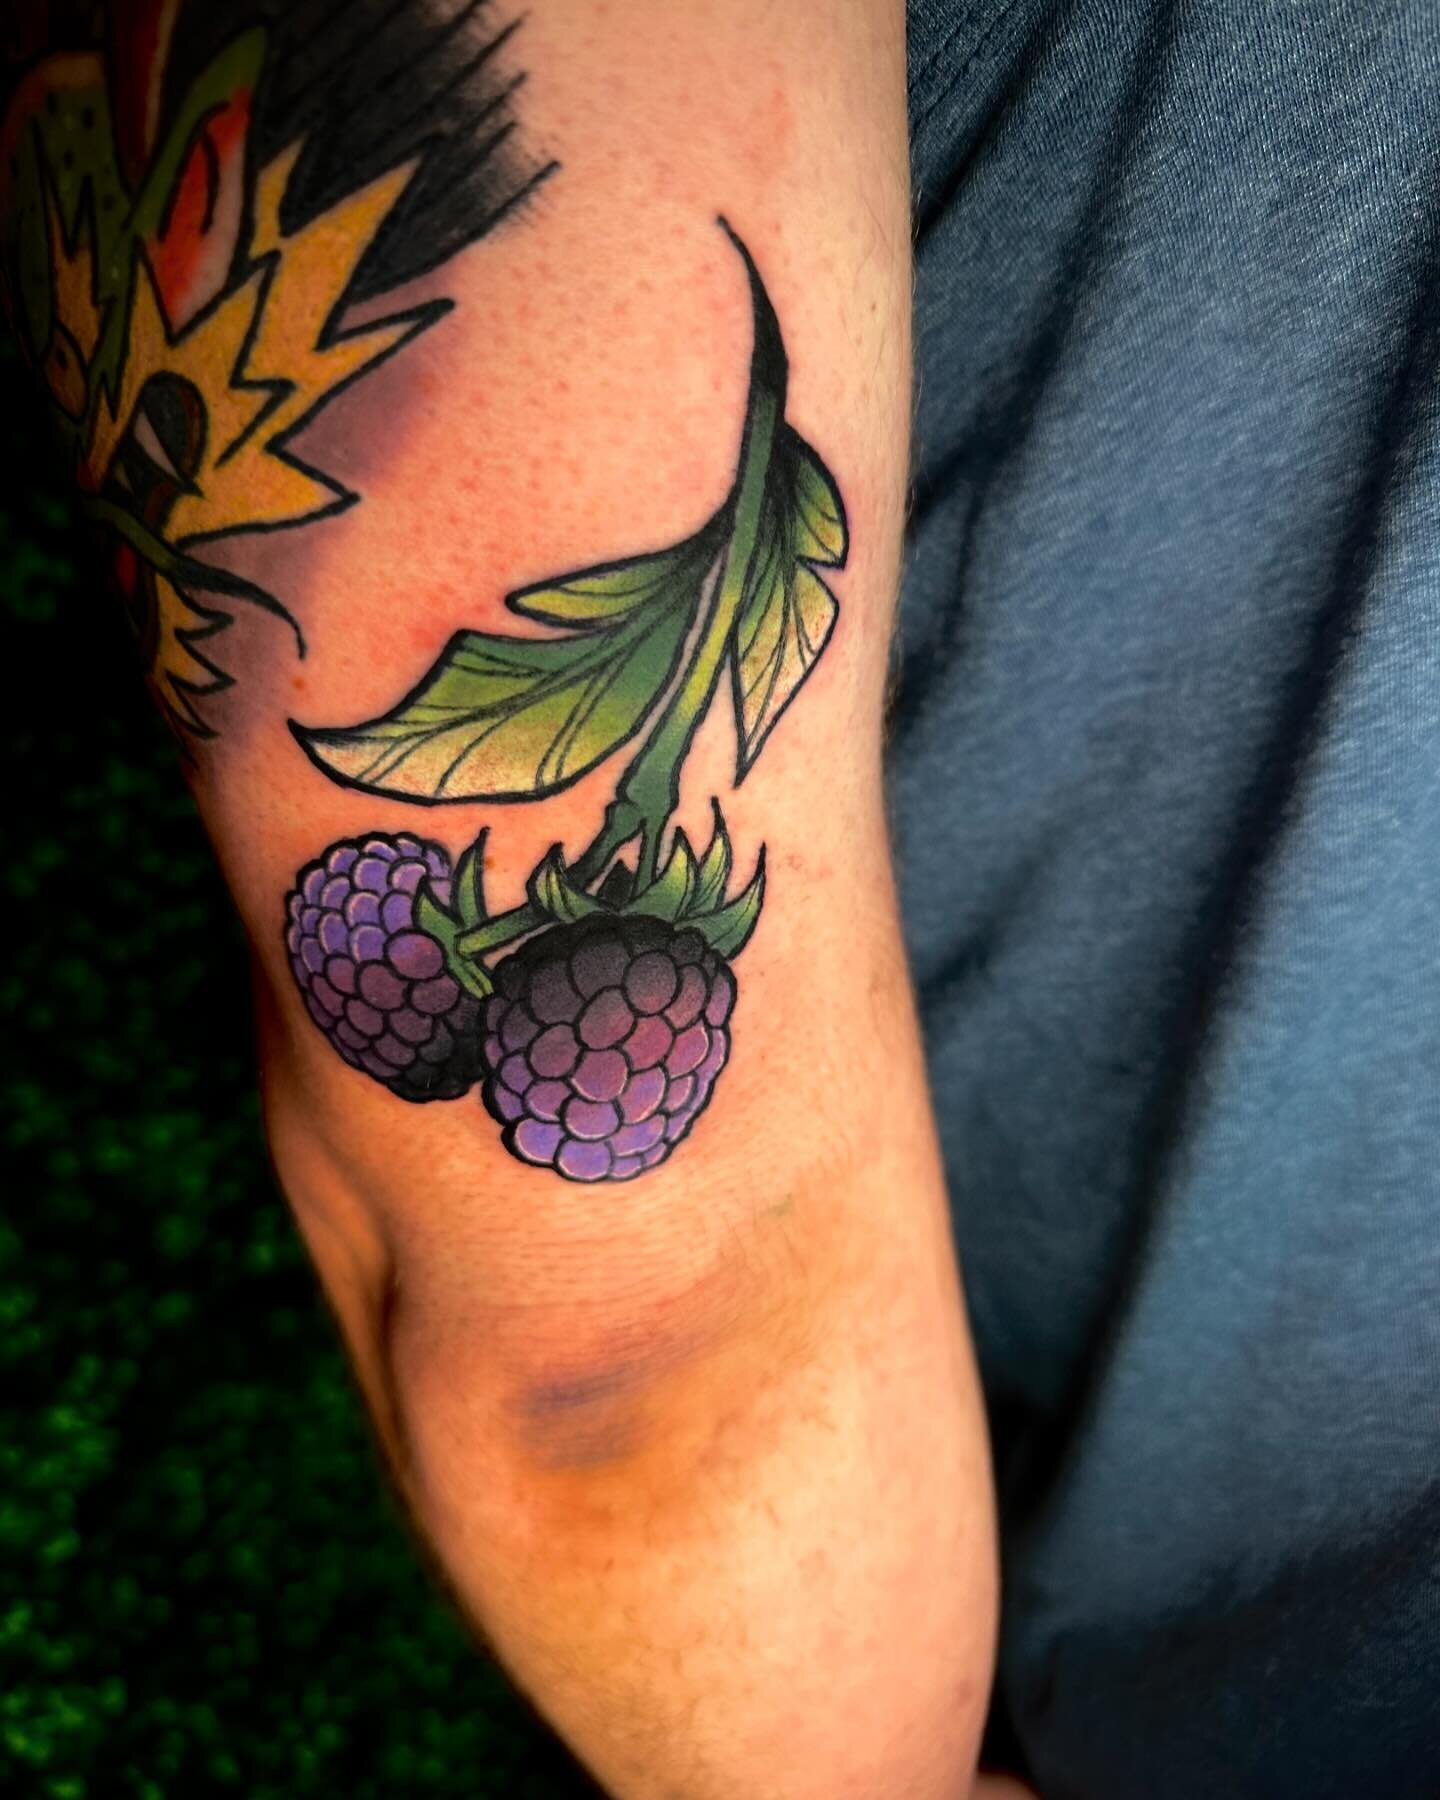 Some cool blackberries that I got to add to my man @aaronmck92 !! Always fun to hang out and do some cool work! 

If you&rsquo;re wanting some cool pieces hit me up for a custom or check out my available flash highlight! 

#fruit #fruittattoo #blackb